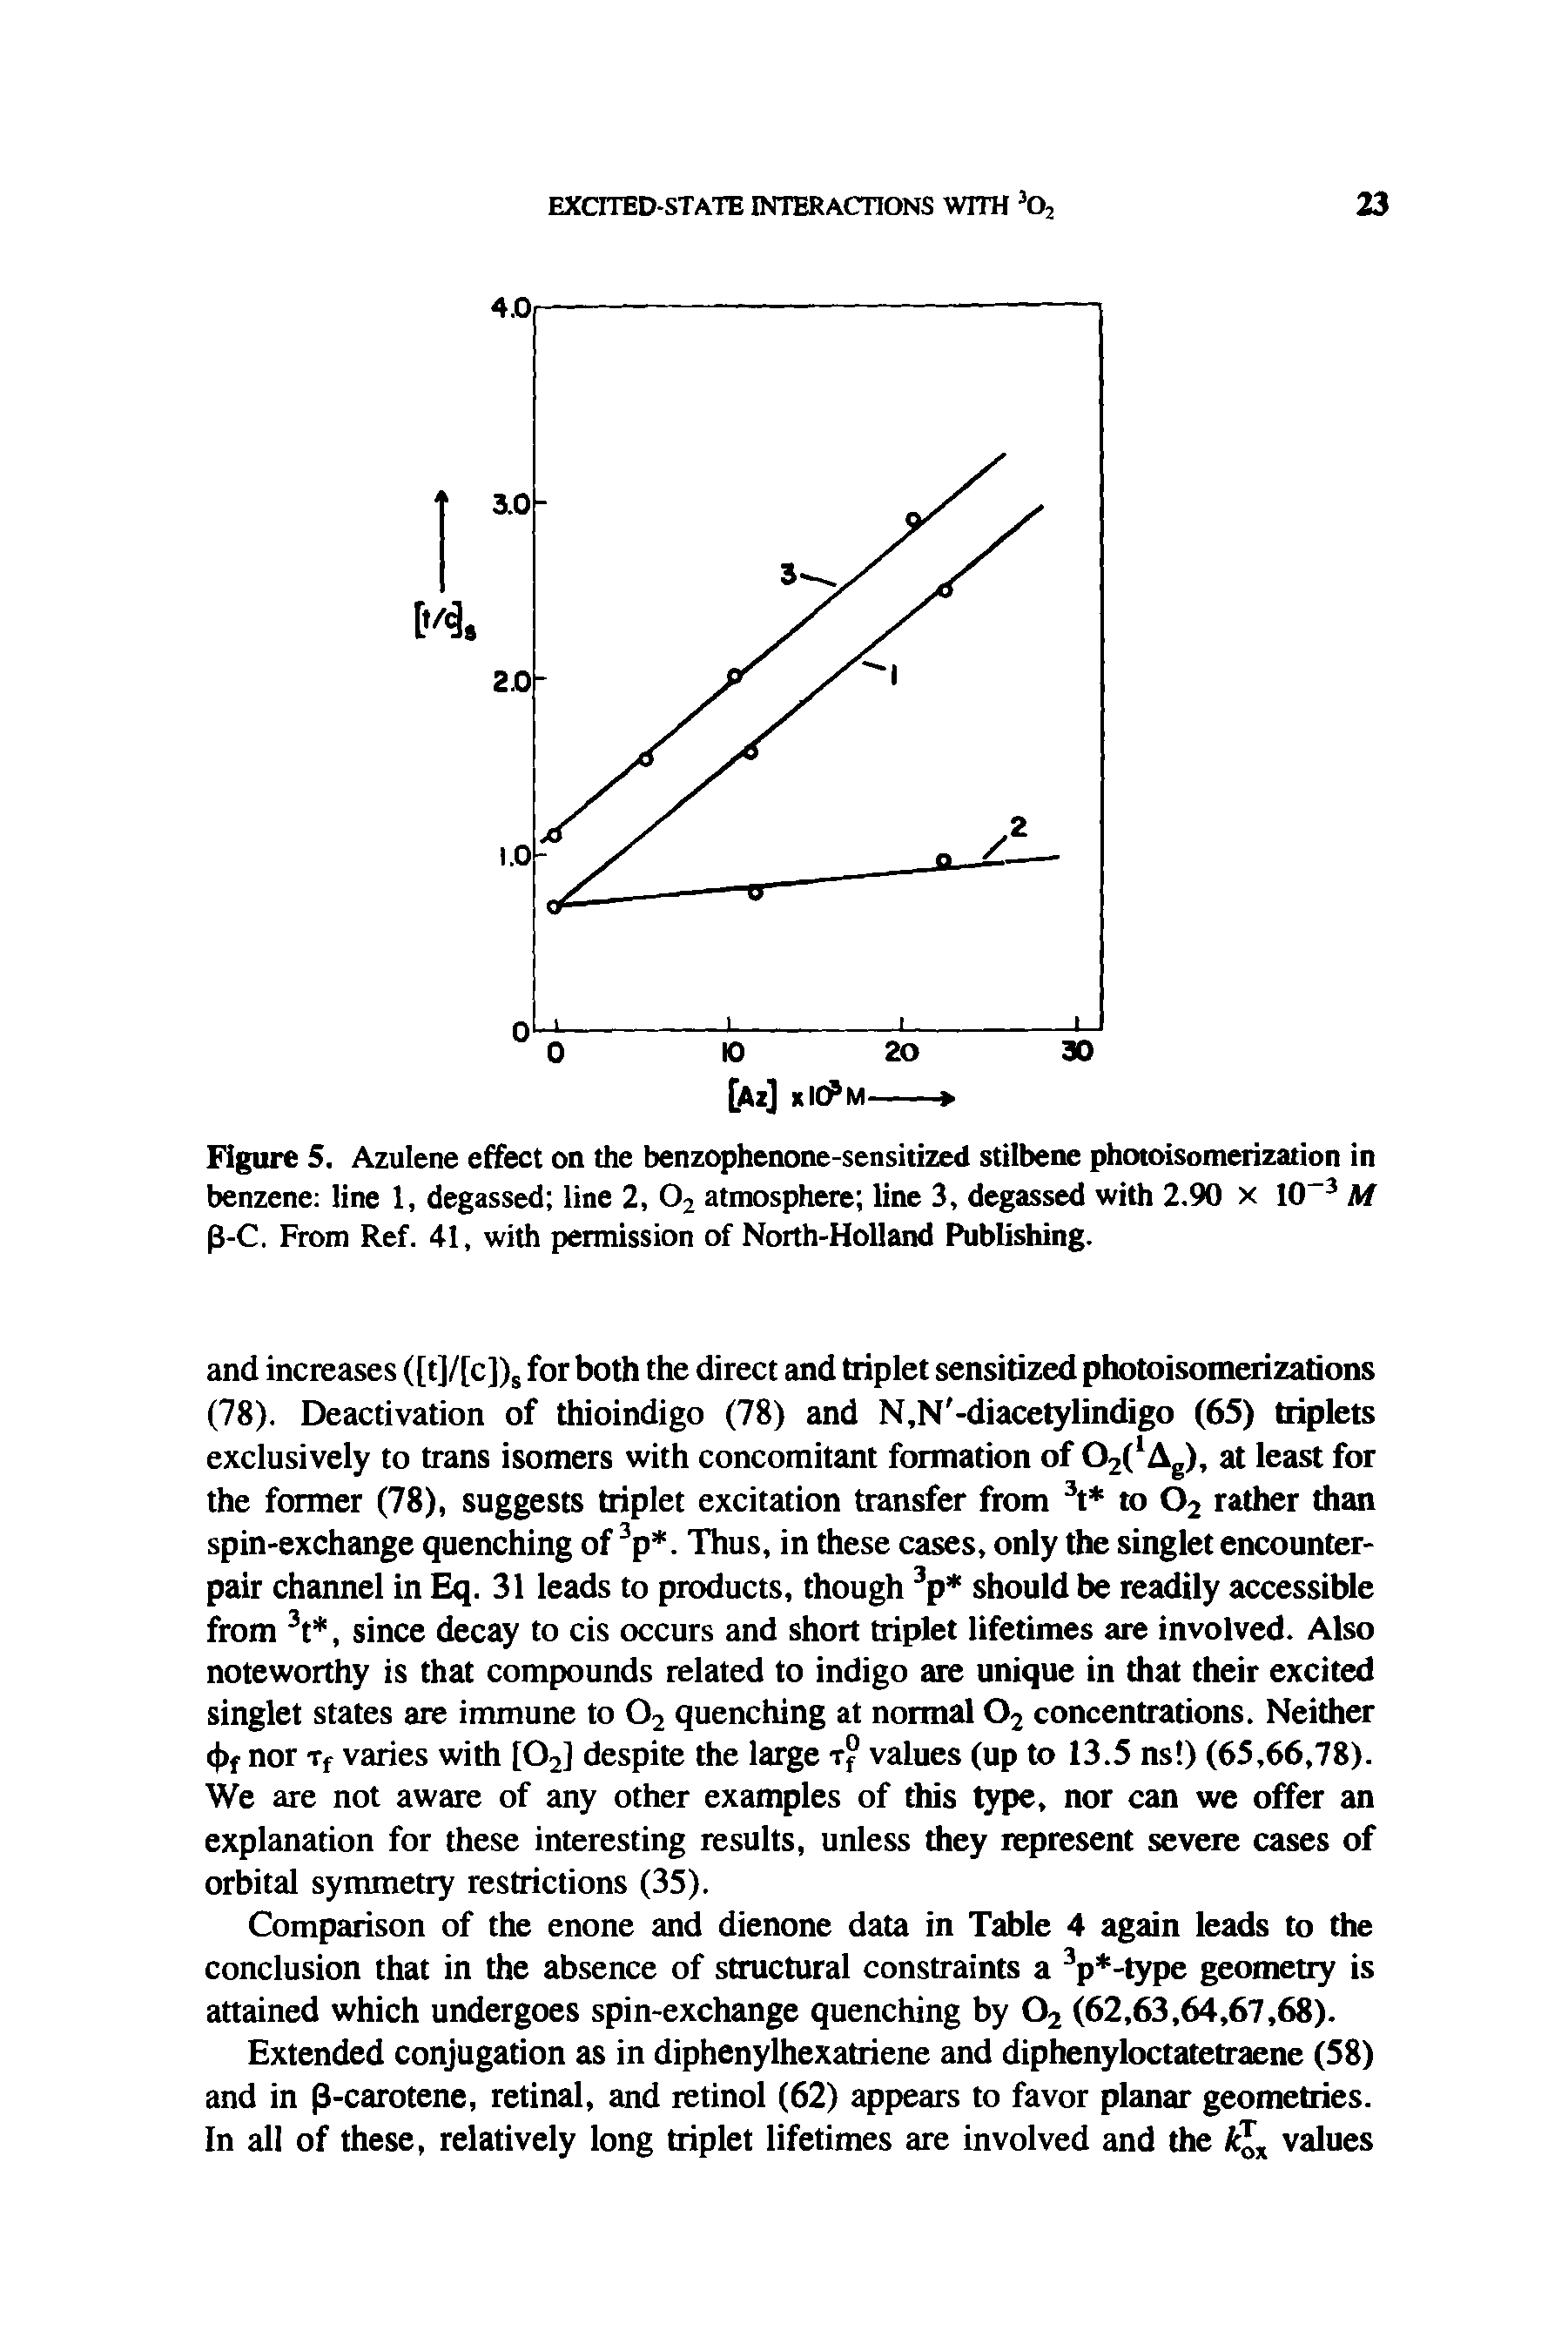 Figure 5. Azulene effect on the benzophenone-sensitized stilbene photoisomerization in benzene line 1, degassed line 2, O2 atmosphere line 3, degassed with 2.90 x 10 M p-C. From Ref. 41, with permission of North-Holland Publishing.